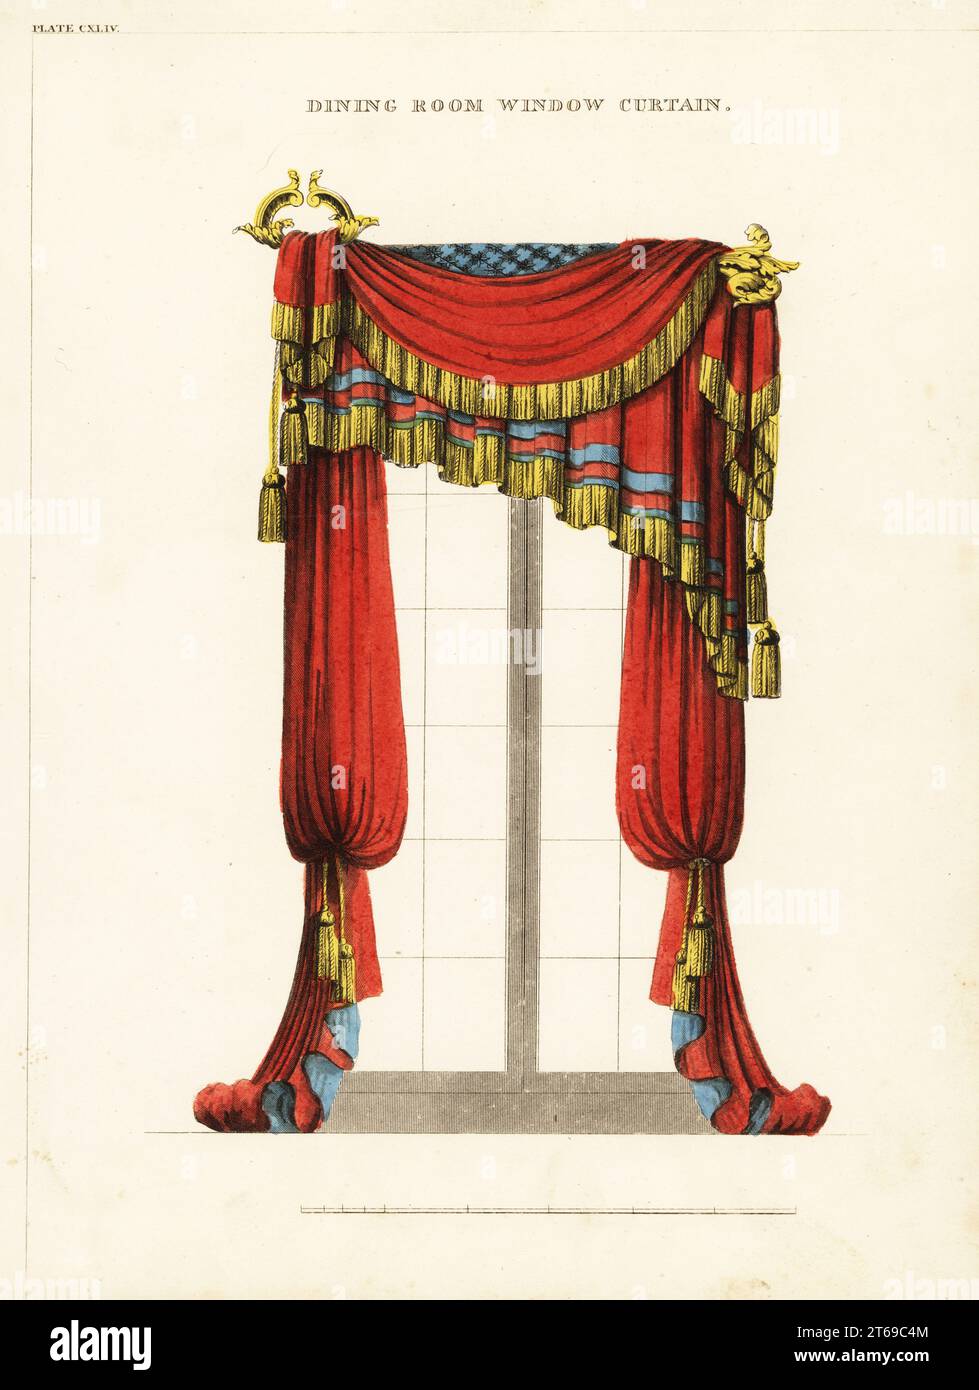 Dining room window curtains, Regency style. Fringed and tasseled drapes hung over ornate gilt curtain rods, with blue-lined curtains below. Handcoloured copperplate engraving from George Smiths The Cabinet-Maker and Upholsterers Guide, Jones and Co., London, 1828. George Smith was upholsterer and furniture draughtsman to his Majesty (the Prince of Wales, later King George IV), circa 1786-1826. Stock Photo